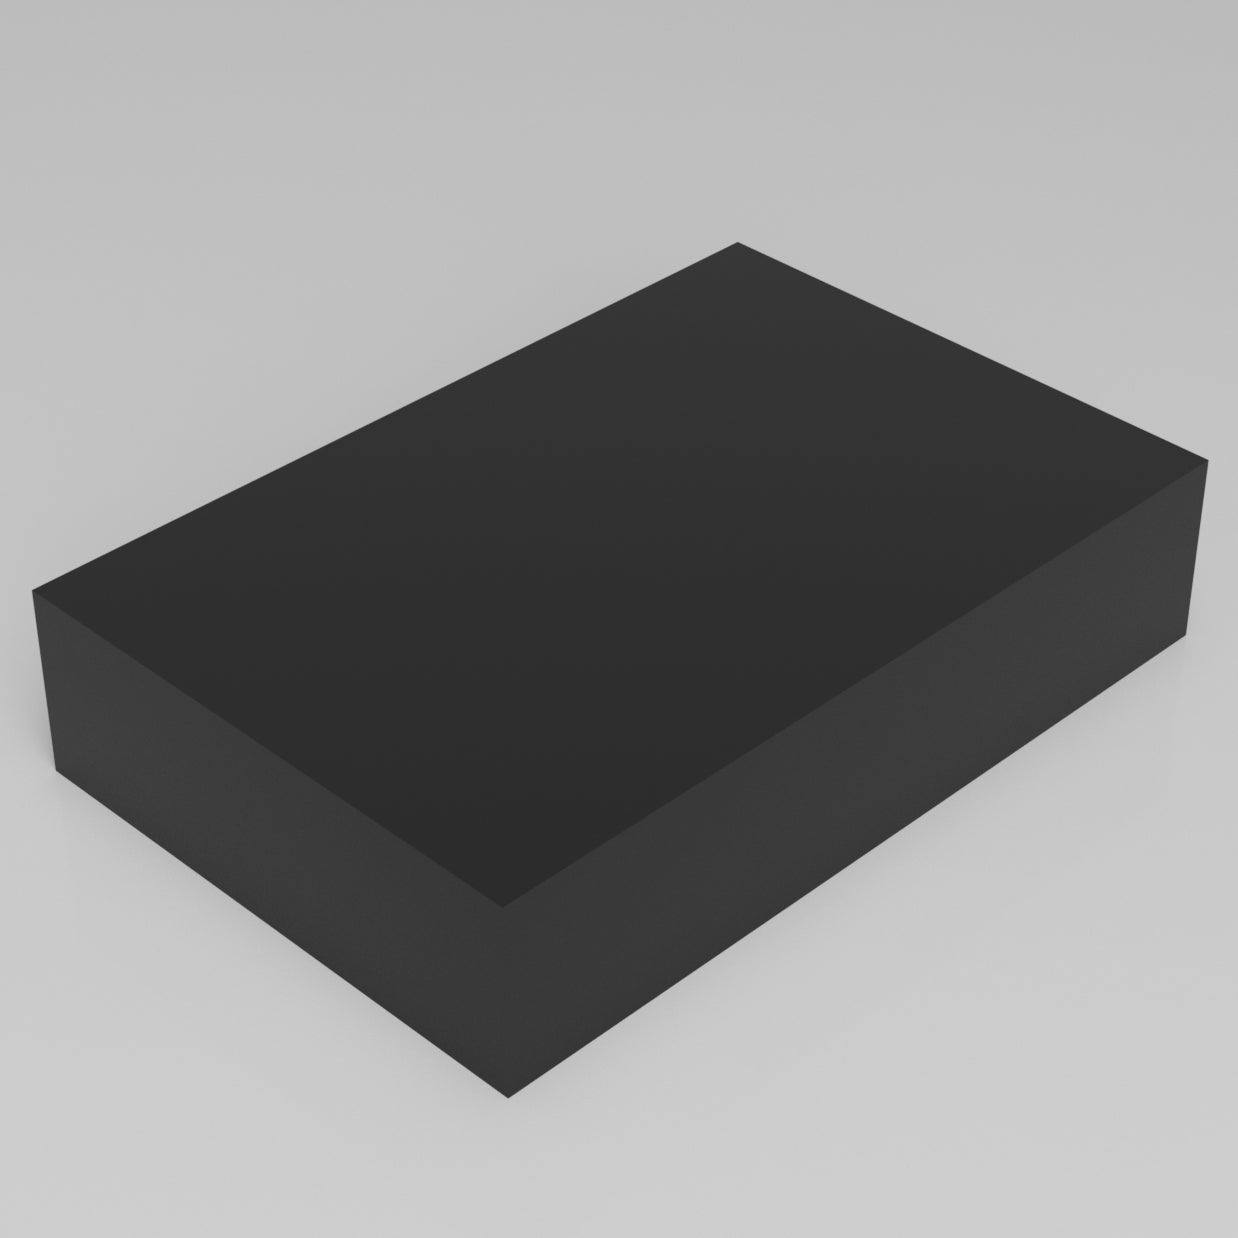 Machinable Wax Rectangular Block Front View 4 Inch by 12 Inch by 18 Inch